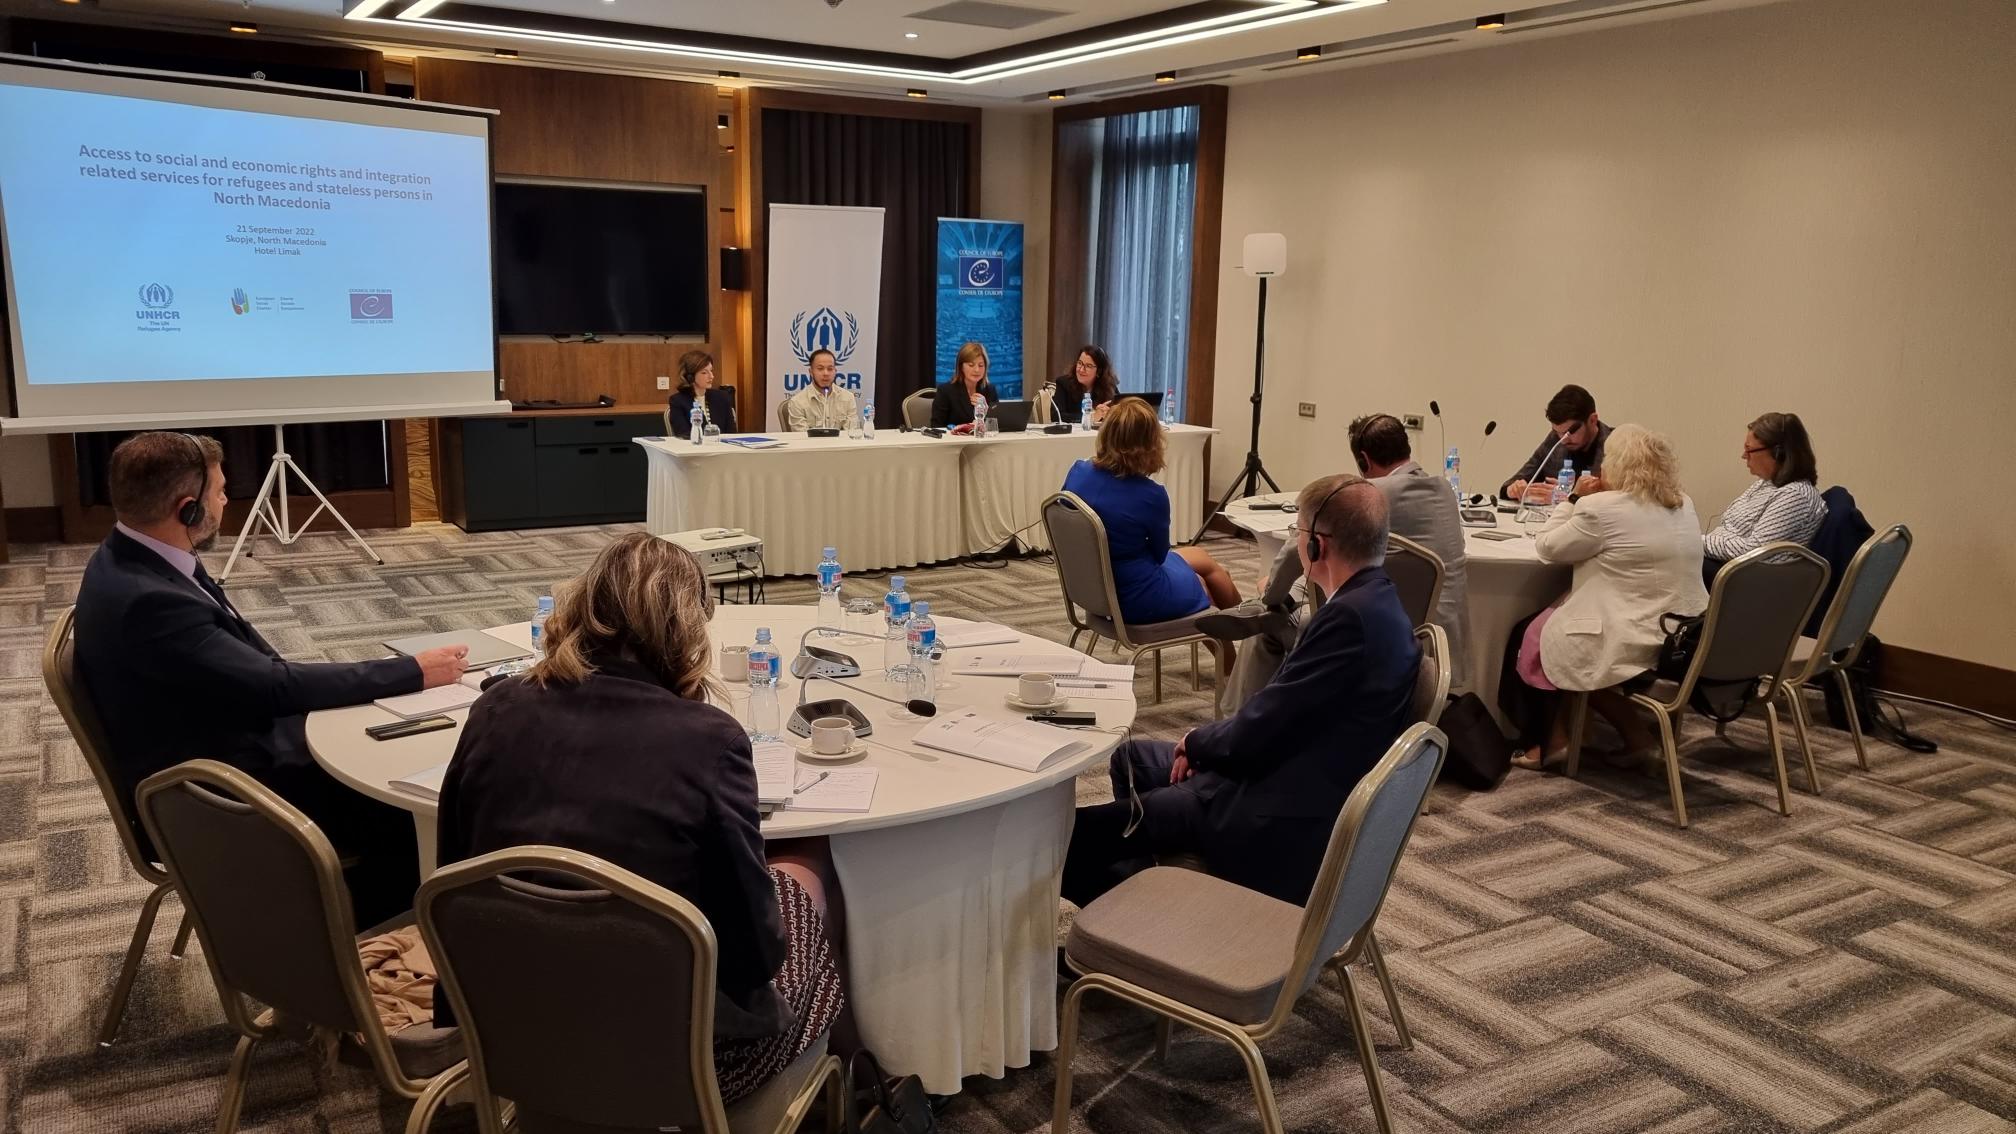 North Macedonia: The Council of Europe and the UNHCR join forces to discuss access to social and economic rights and integration related services for refugees and stateless persons